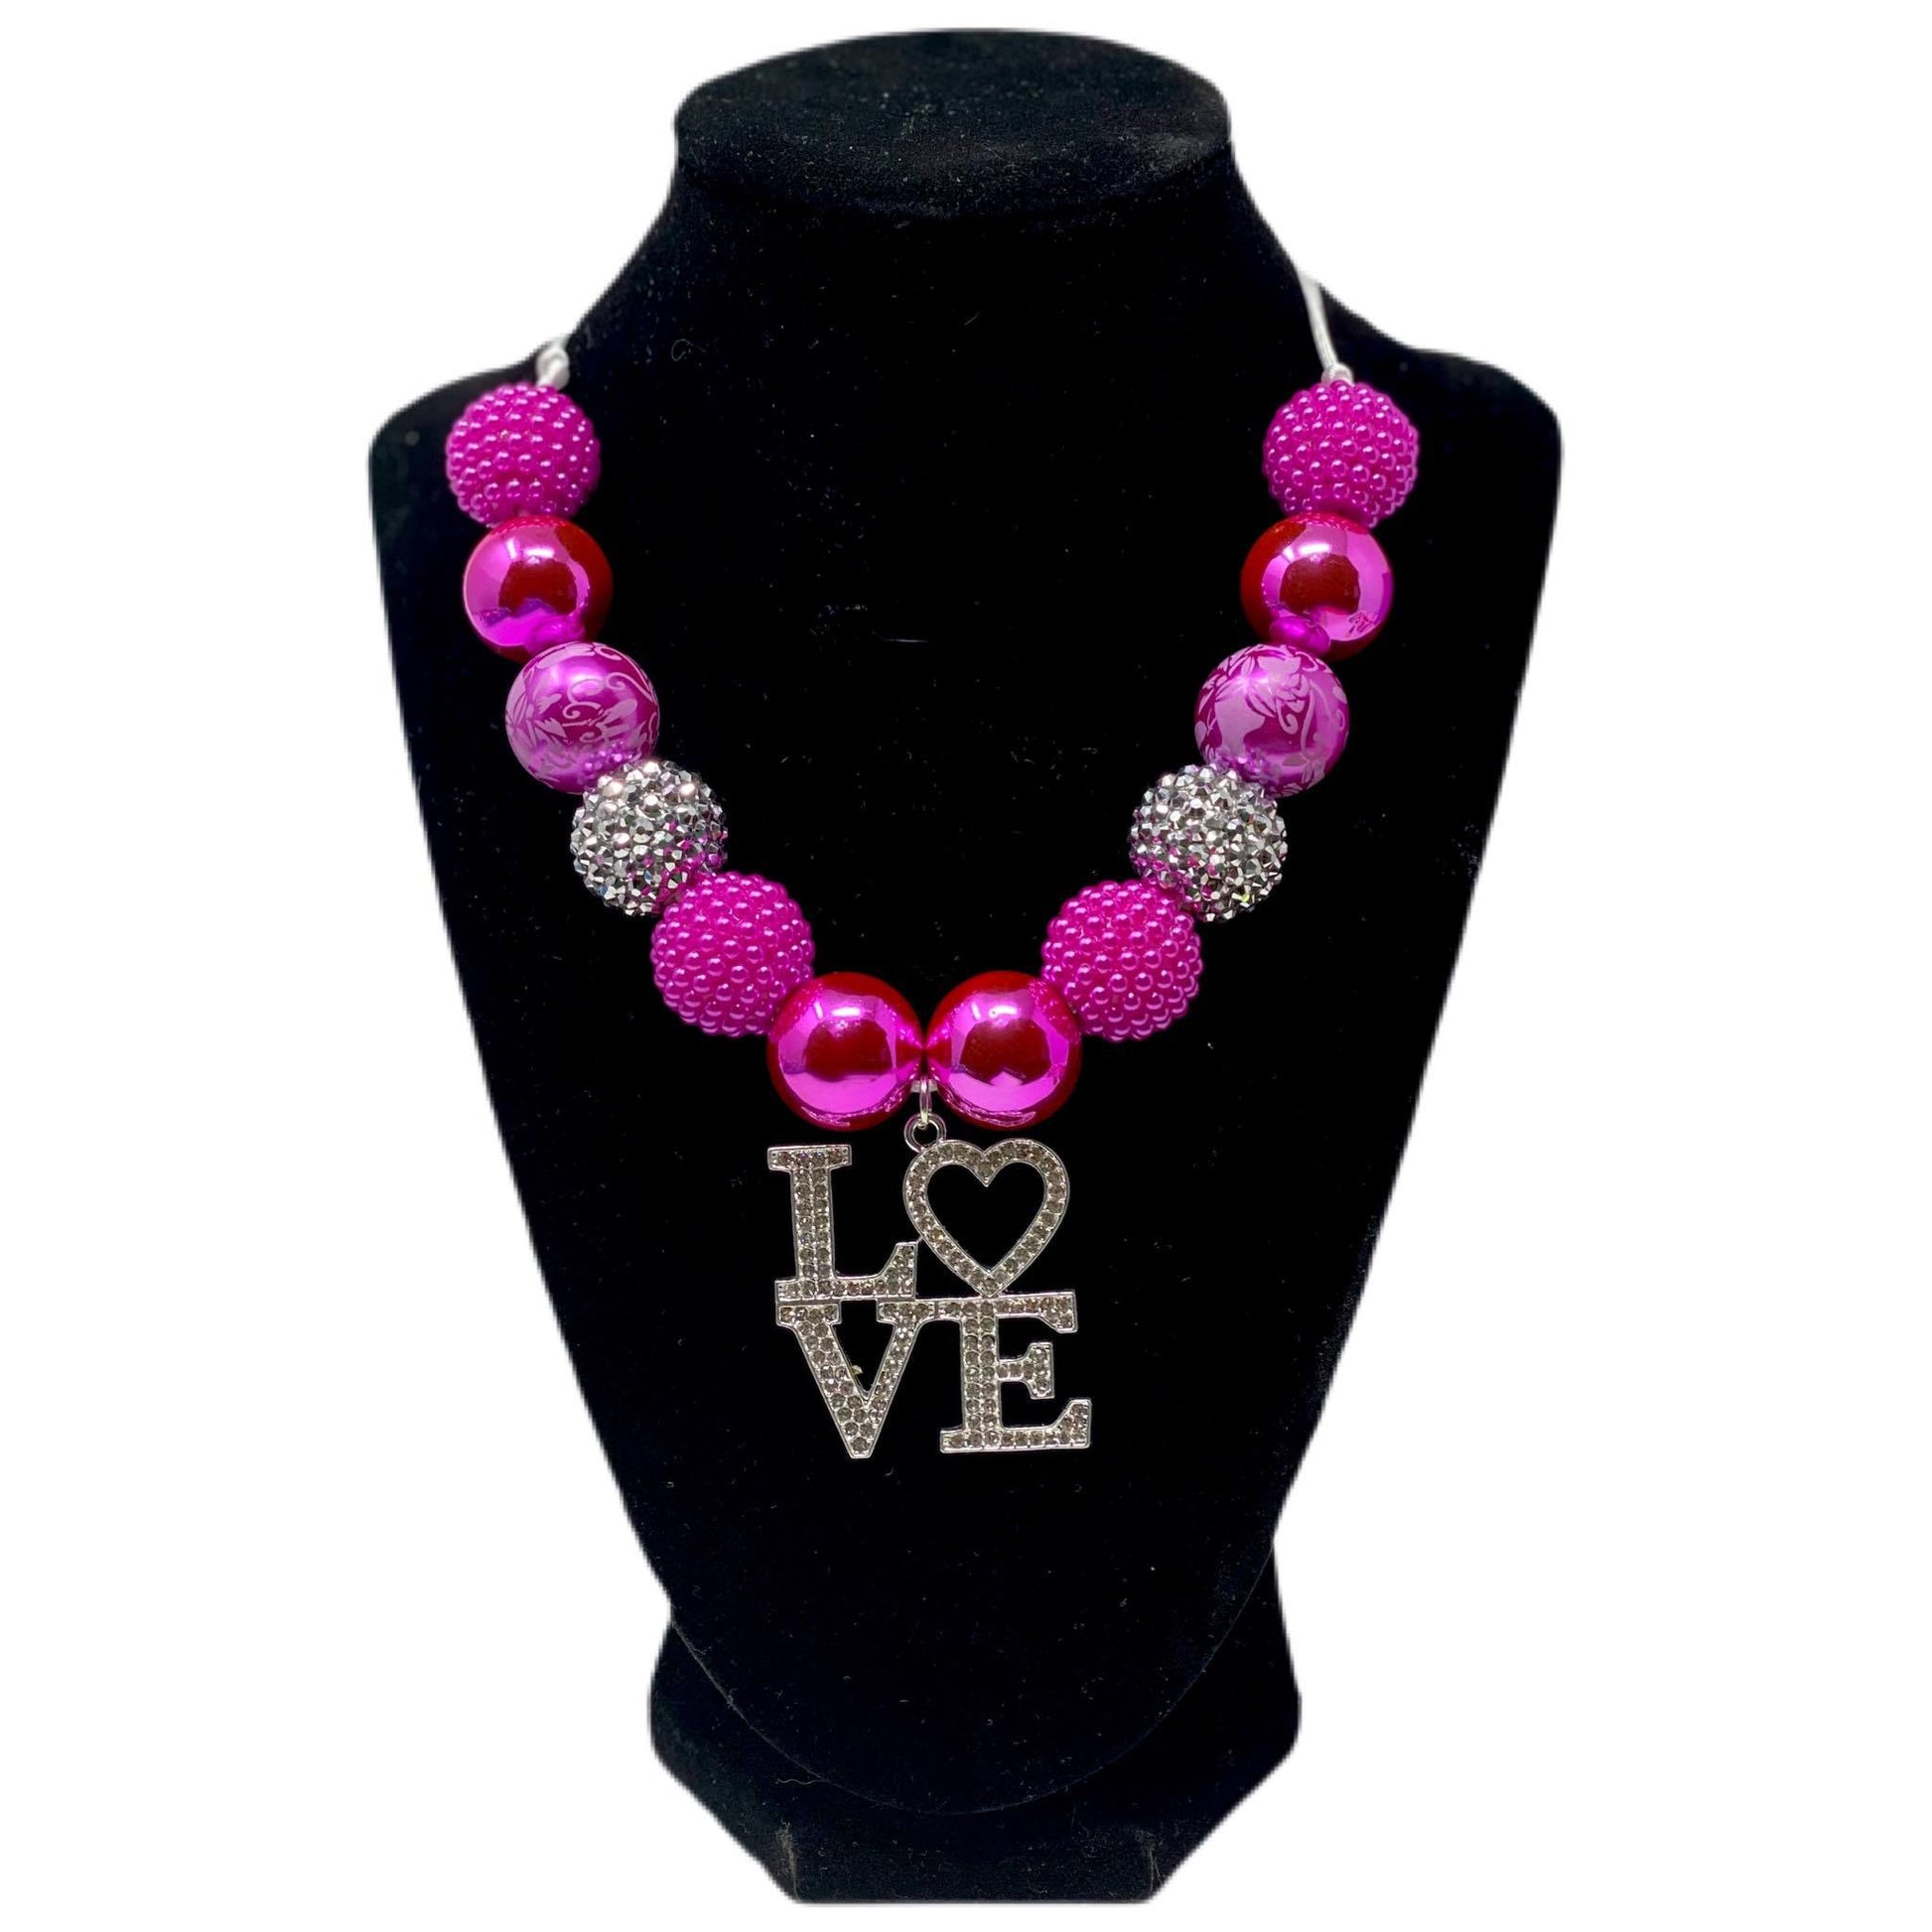 V-Day Bubblegum Necklace with Love Pendant